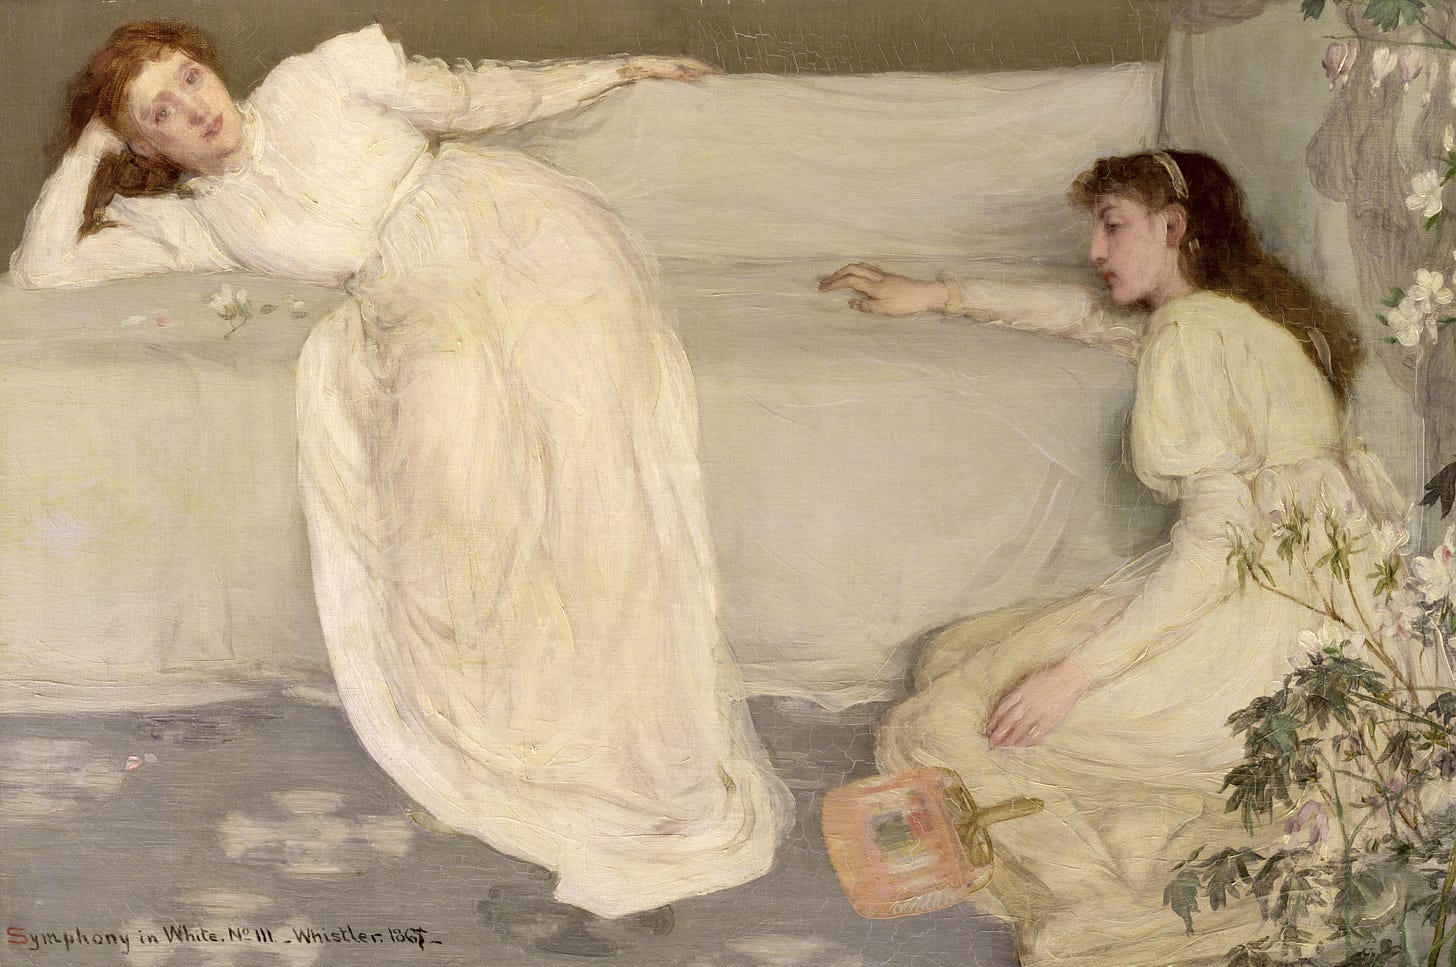 Whistler's Woman in White on display at the National Gallery ...